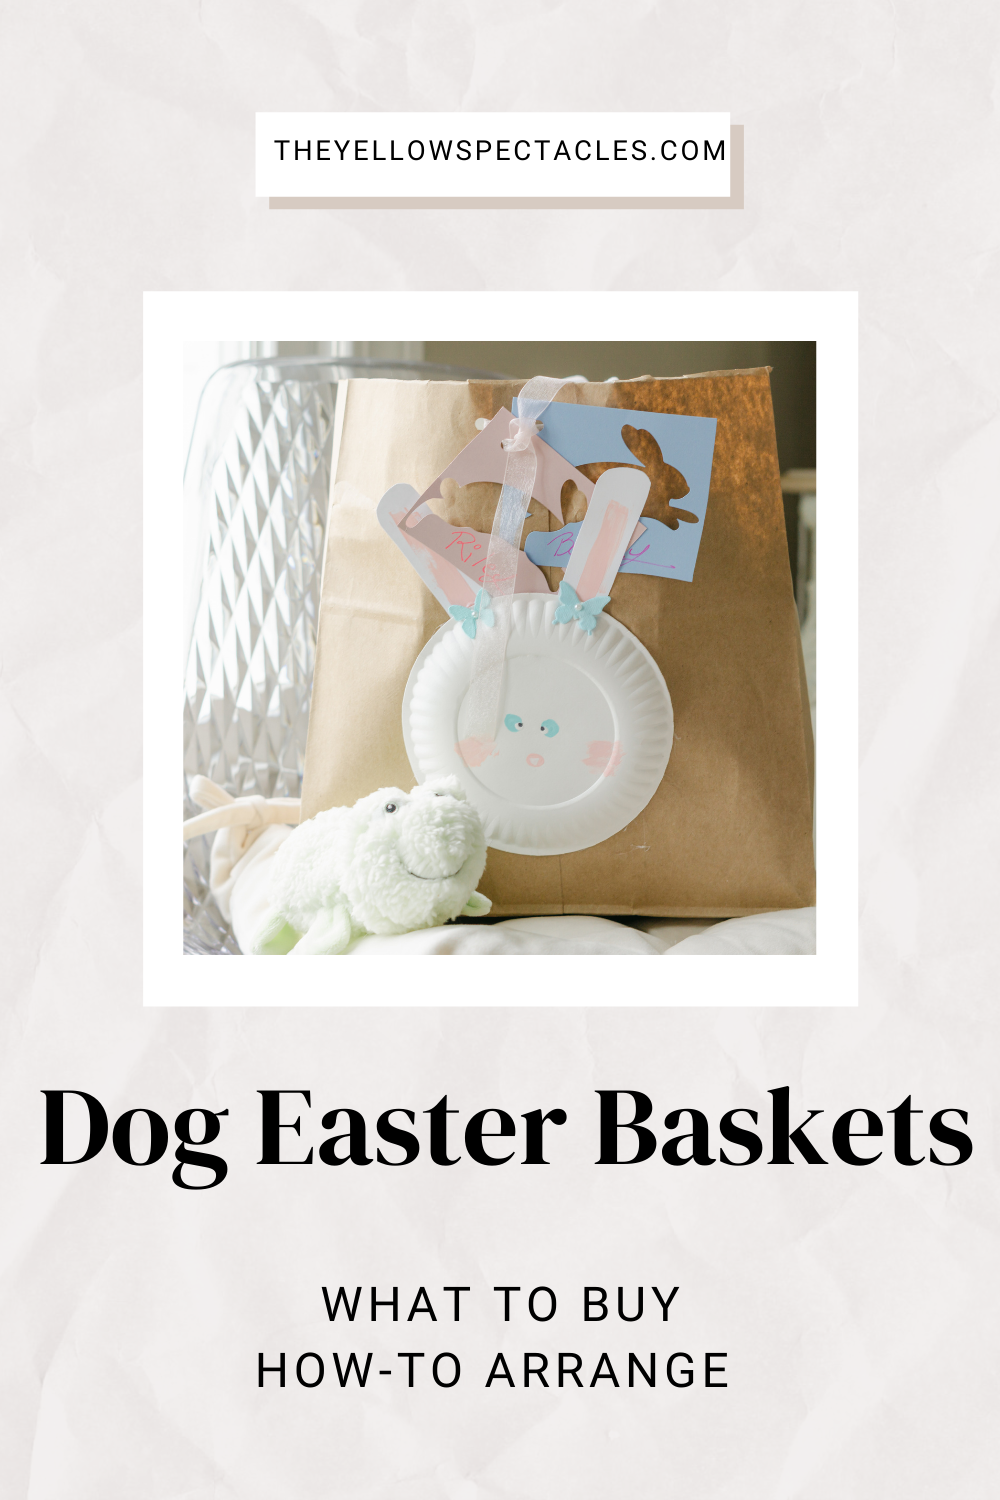 What to include in your dog's Easter basket